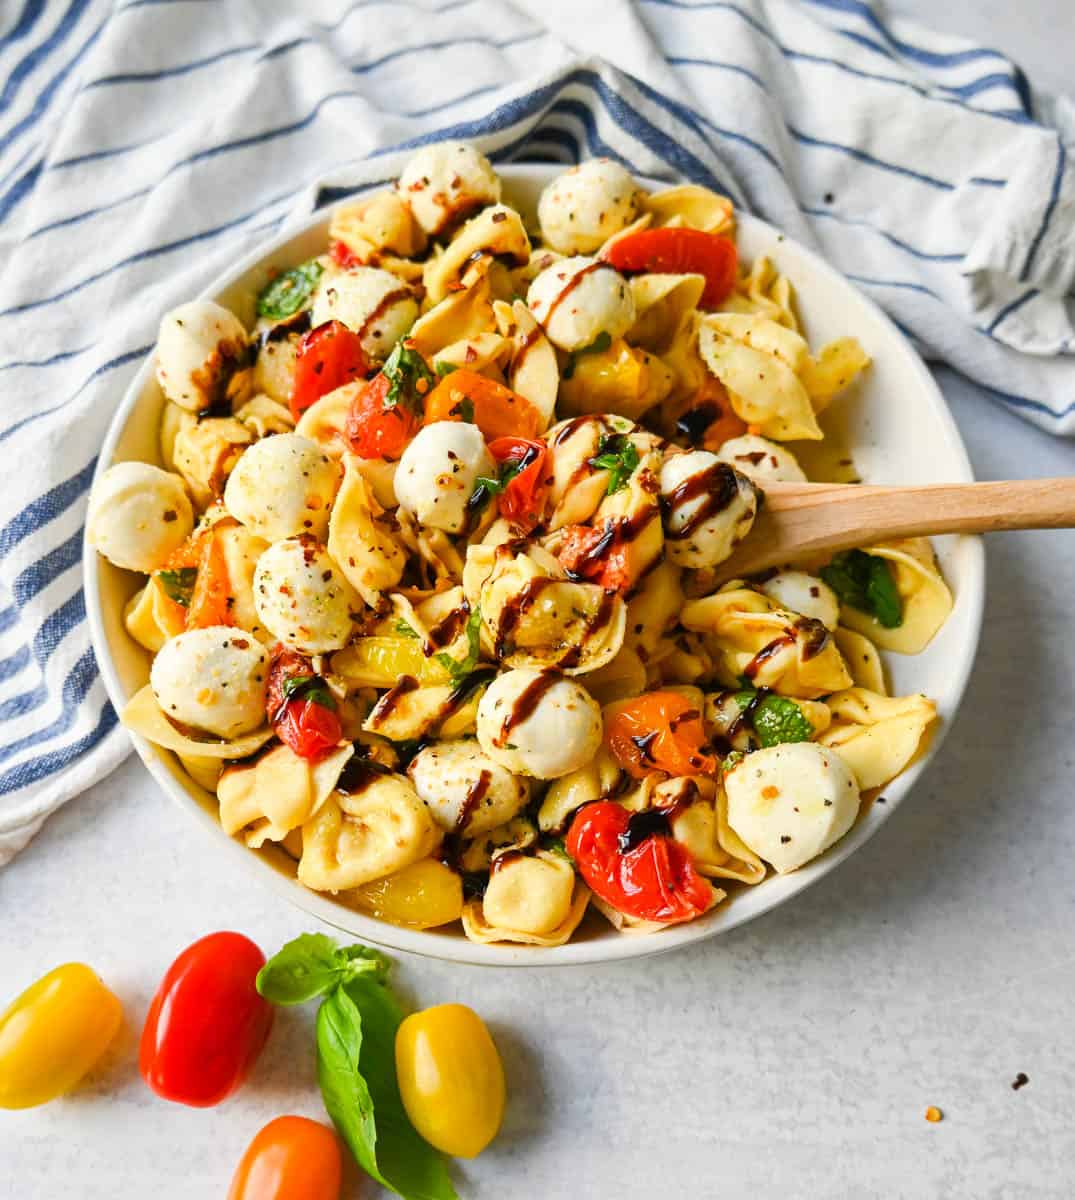 This Caprese Tortellini is made with cheese Tortellini tossed with sauteed garlic and tomatoes in extra virgin olive oil, fresh basil, and fresh mozzarella and spices. This fresh tortellini caprese pasta is perfect for summer!